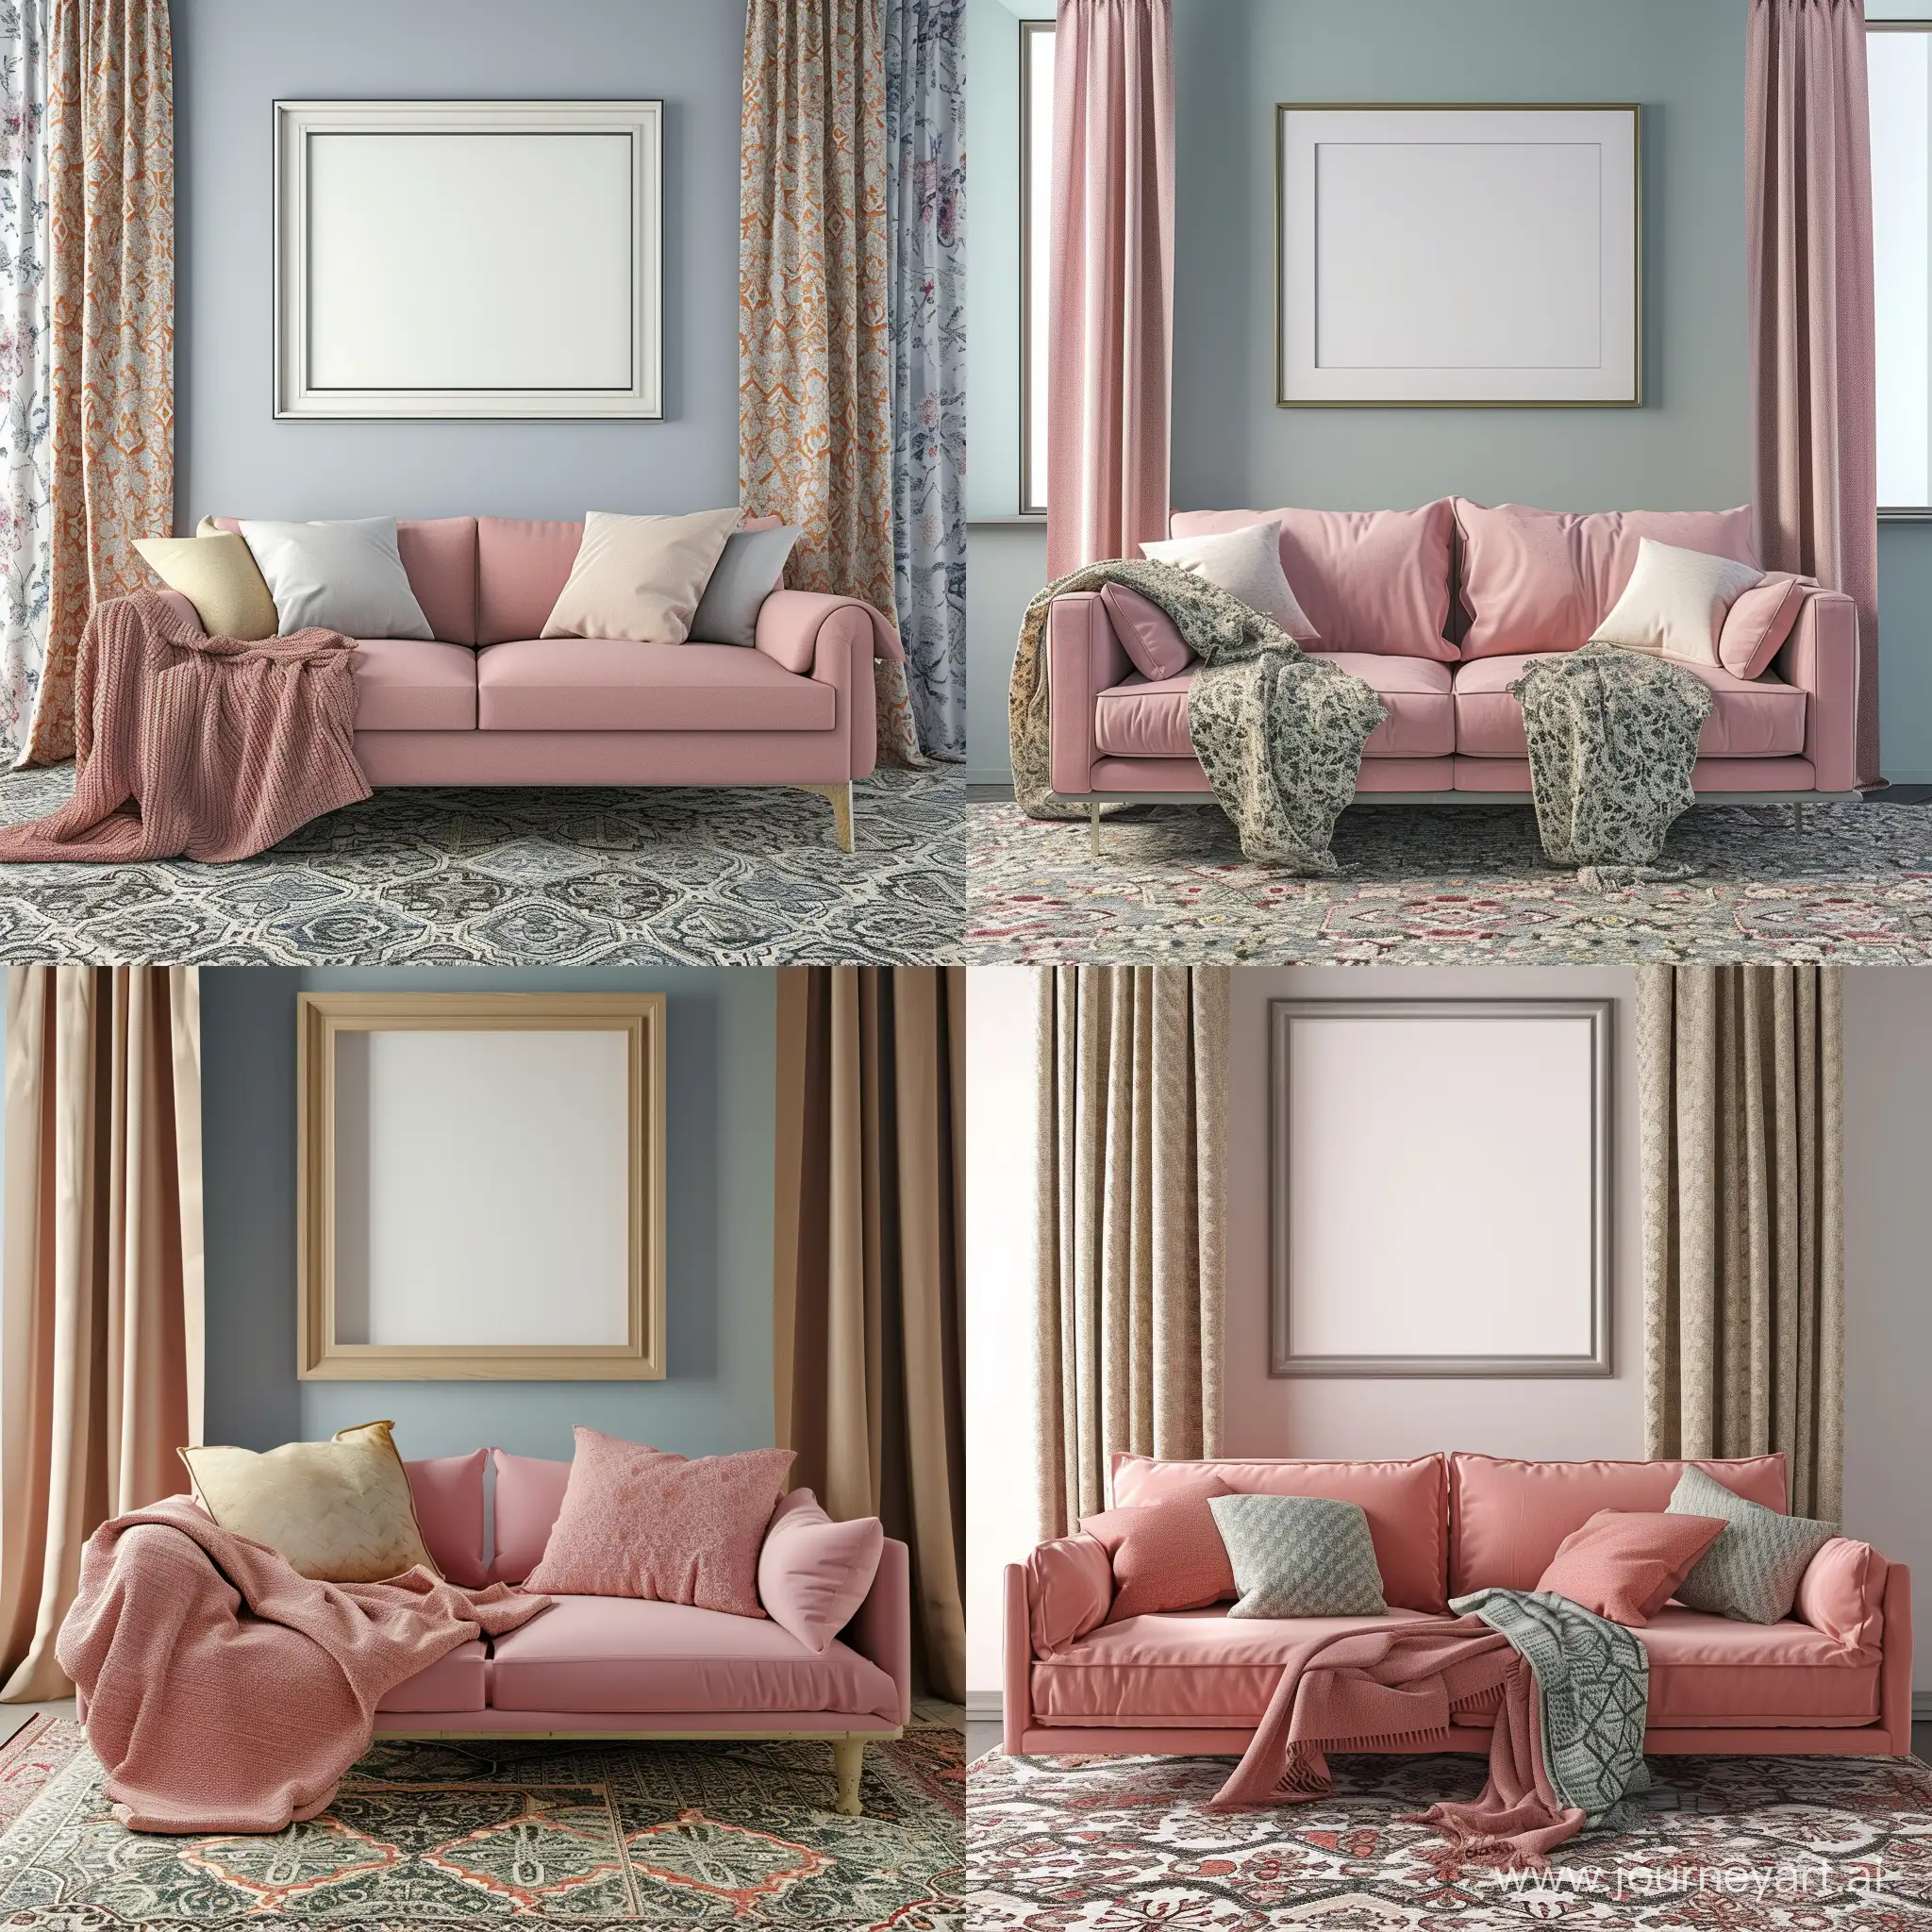 Pink sofa with two blankets and pillows standing in interior sitting room with window with curtains, patterned carpet and empty frame on the wall